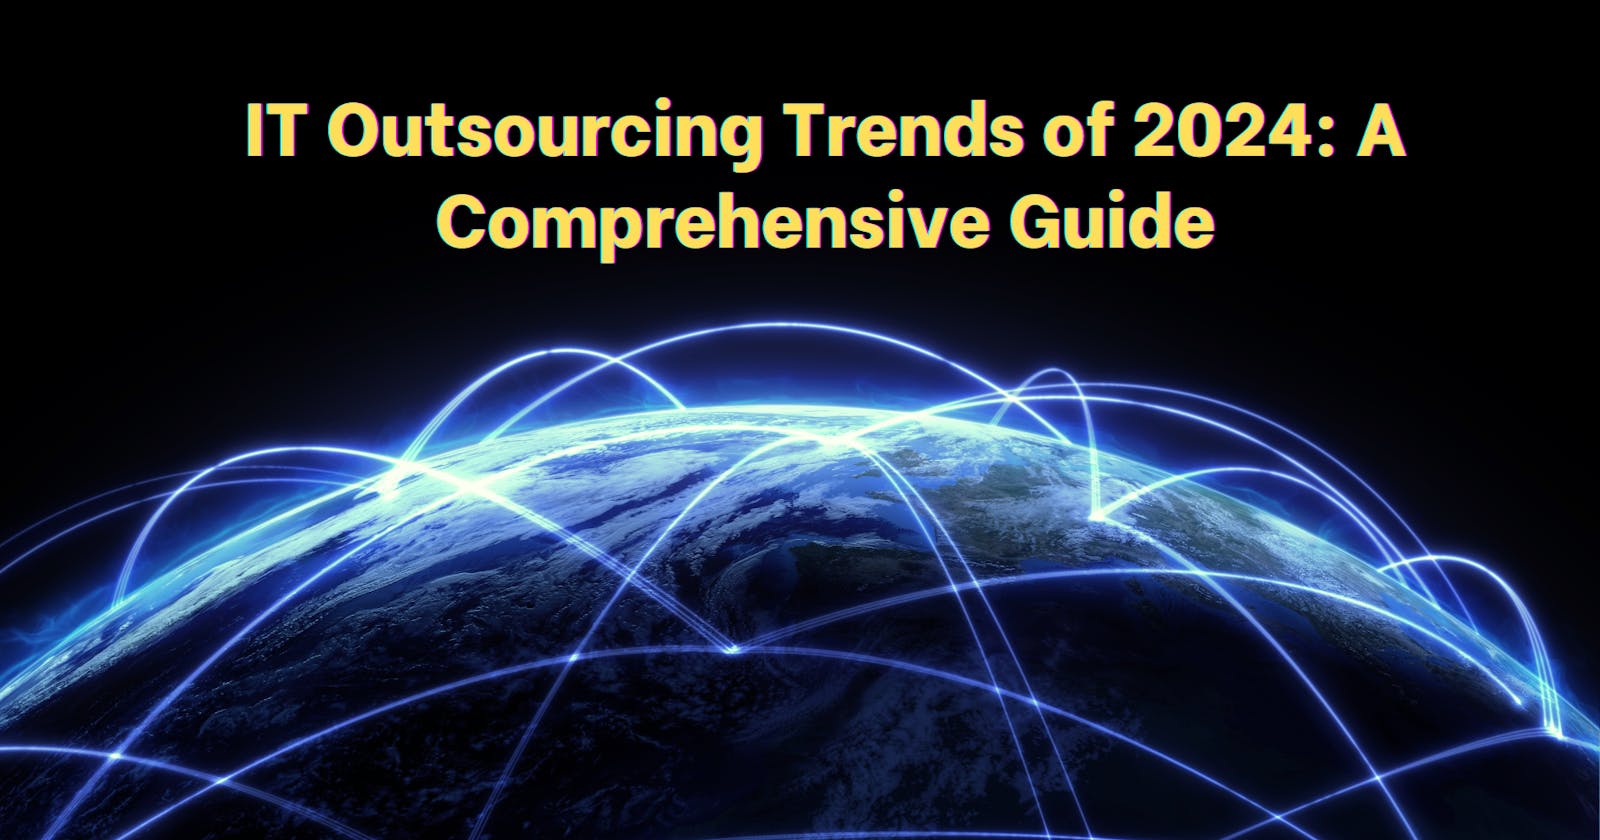 IT Outsourcing Trends of 2024: A Comprehensive Guide